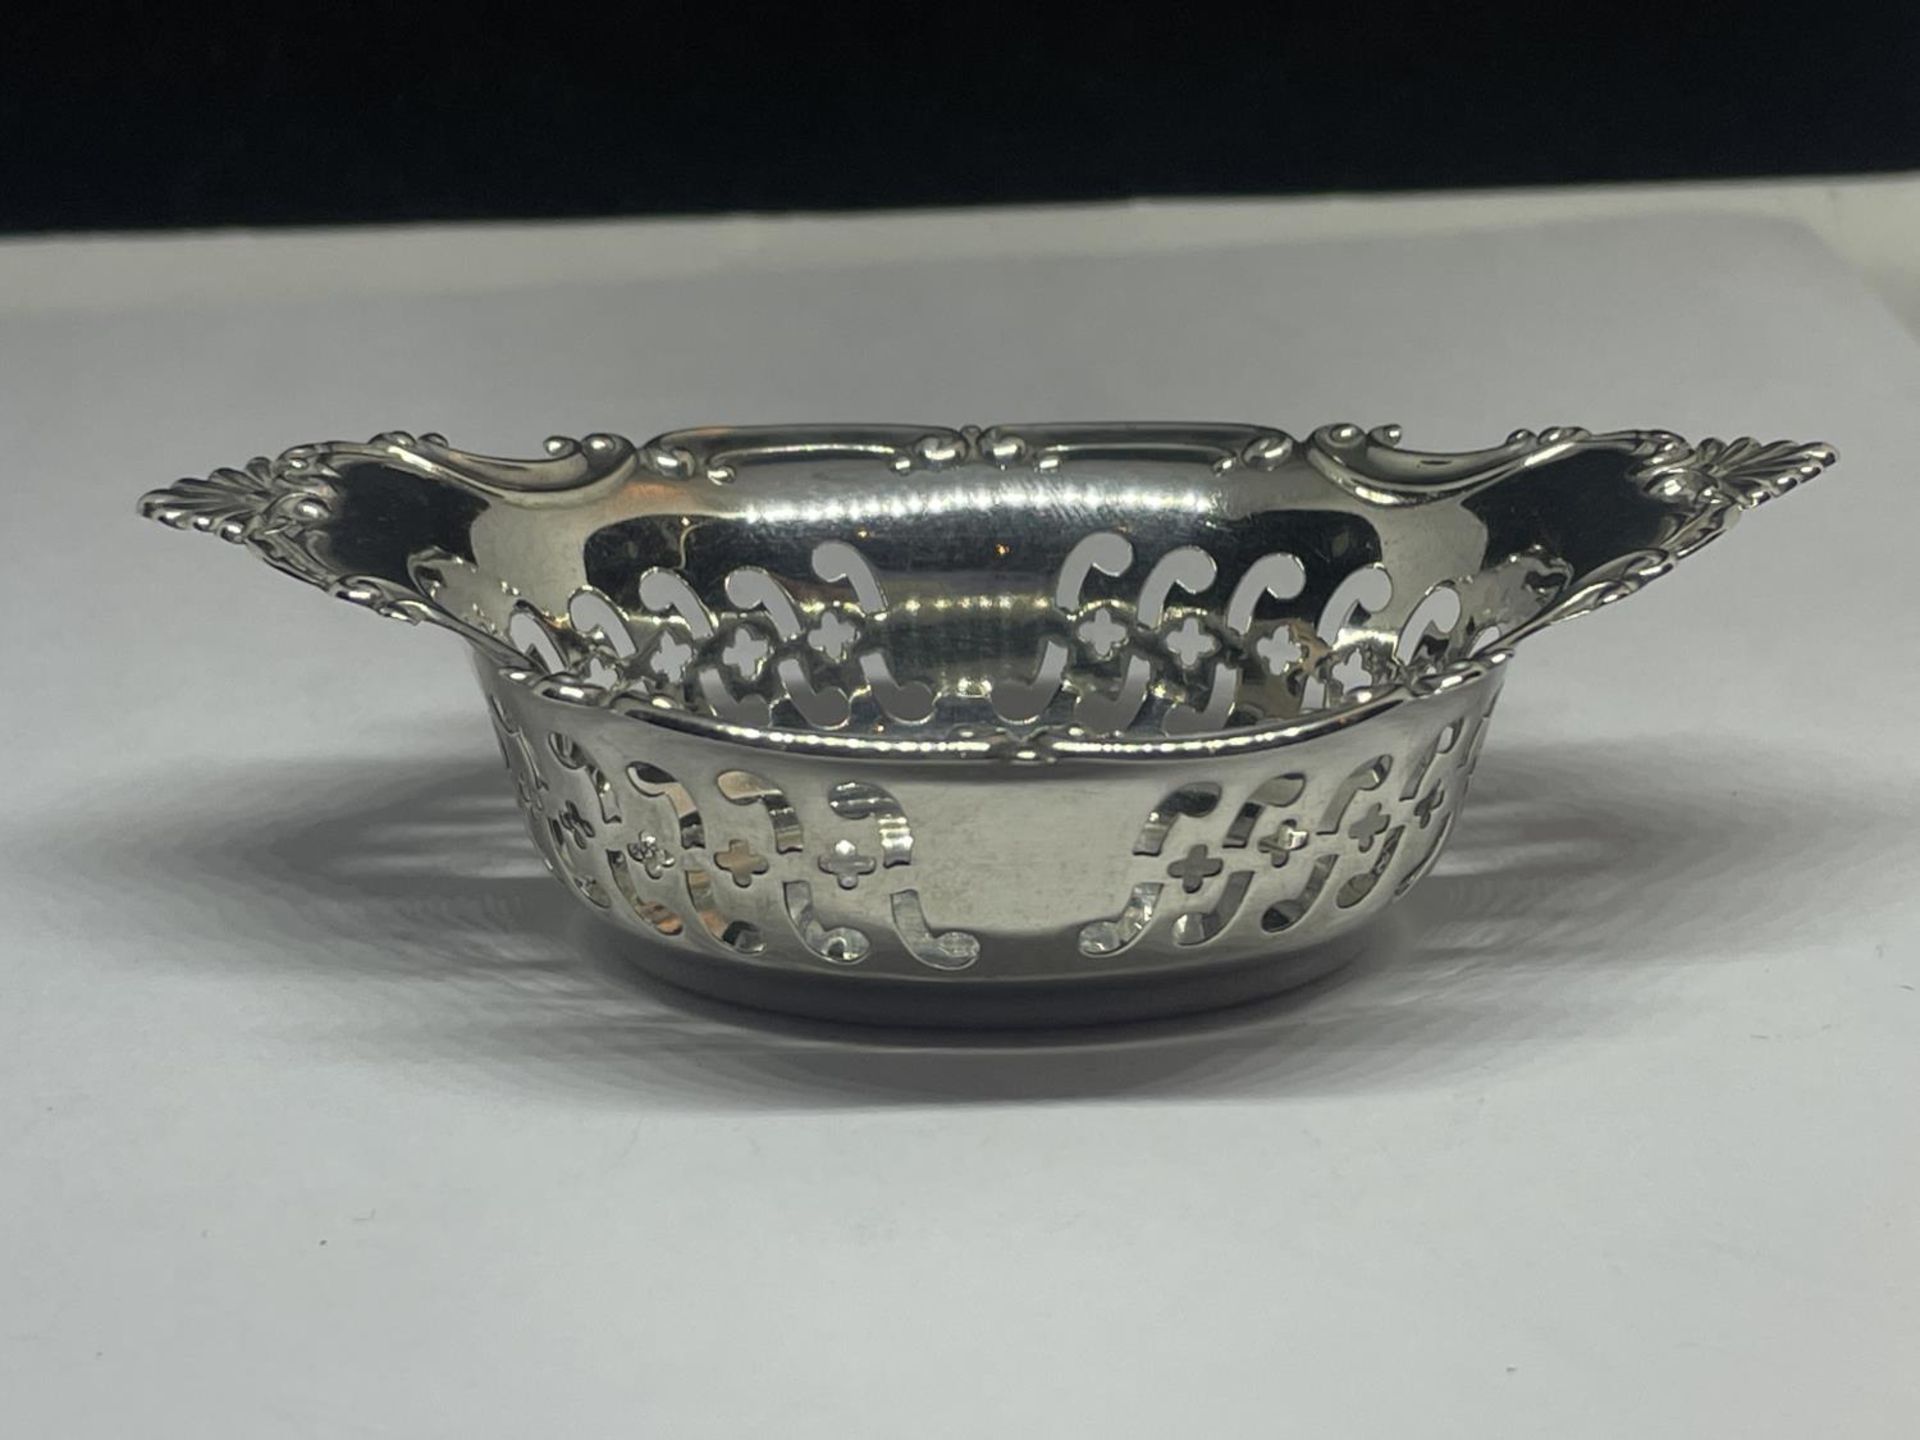 A DECORATIVE STERLING SILVER DISH WITH PIERCED SIDES